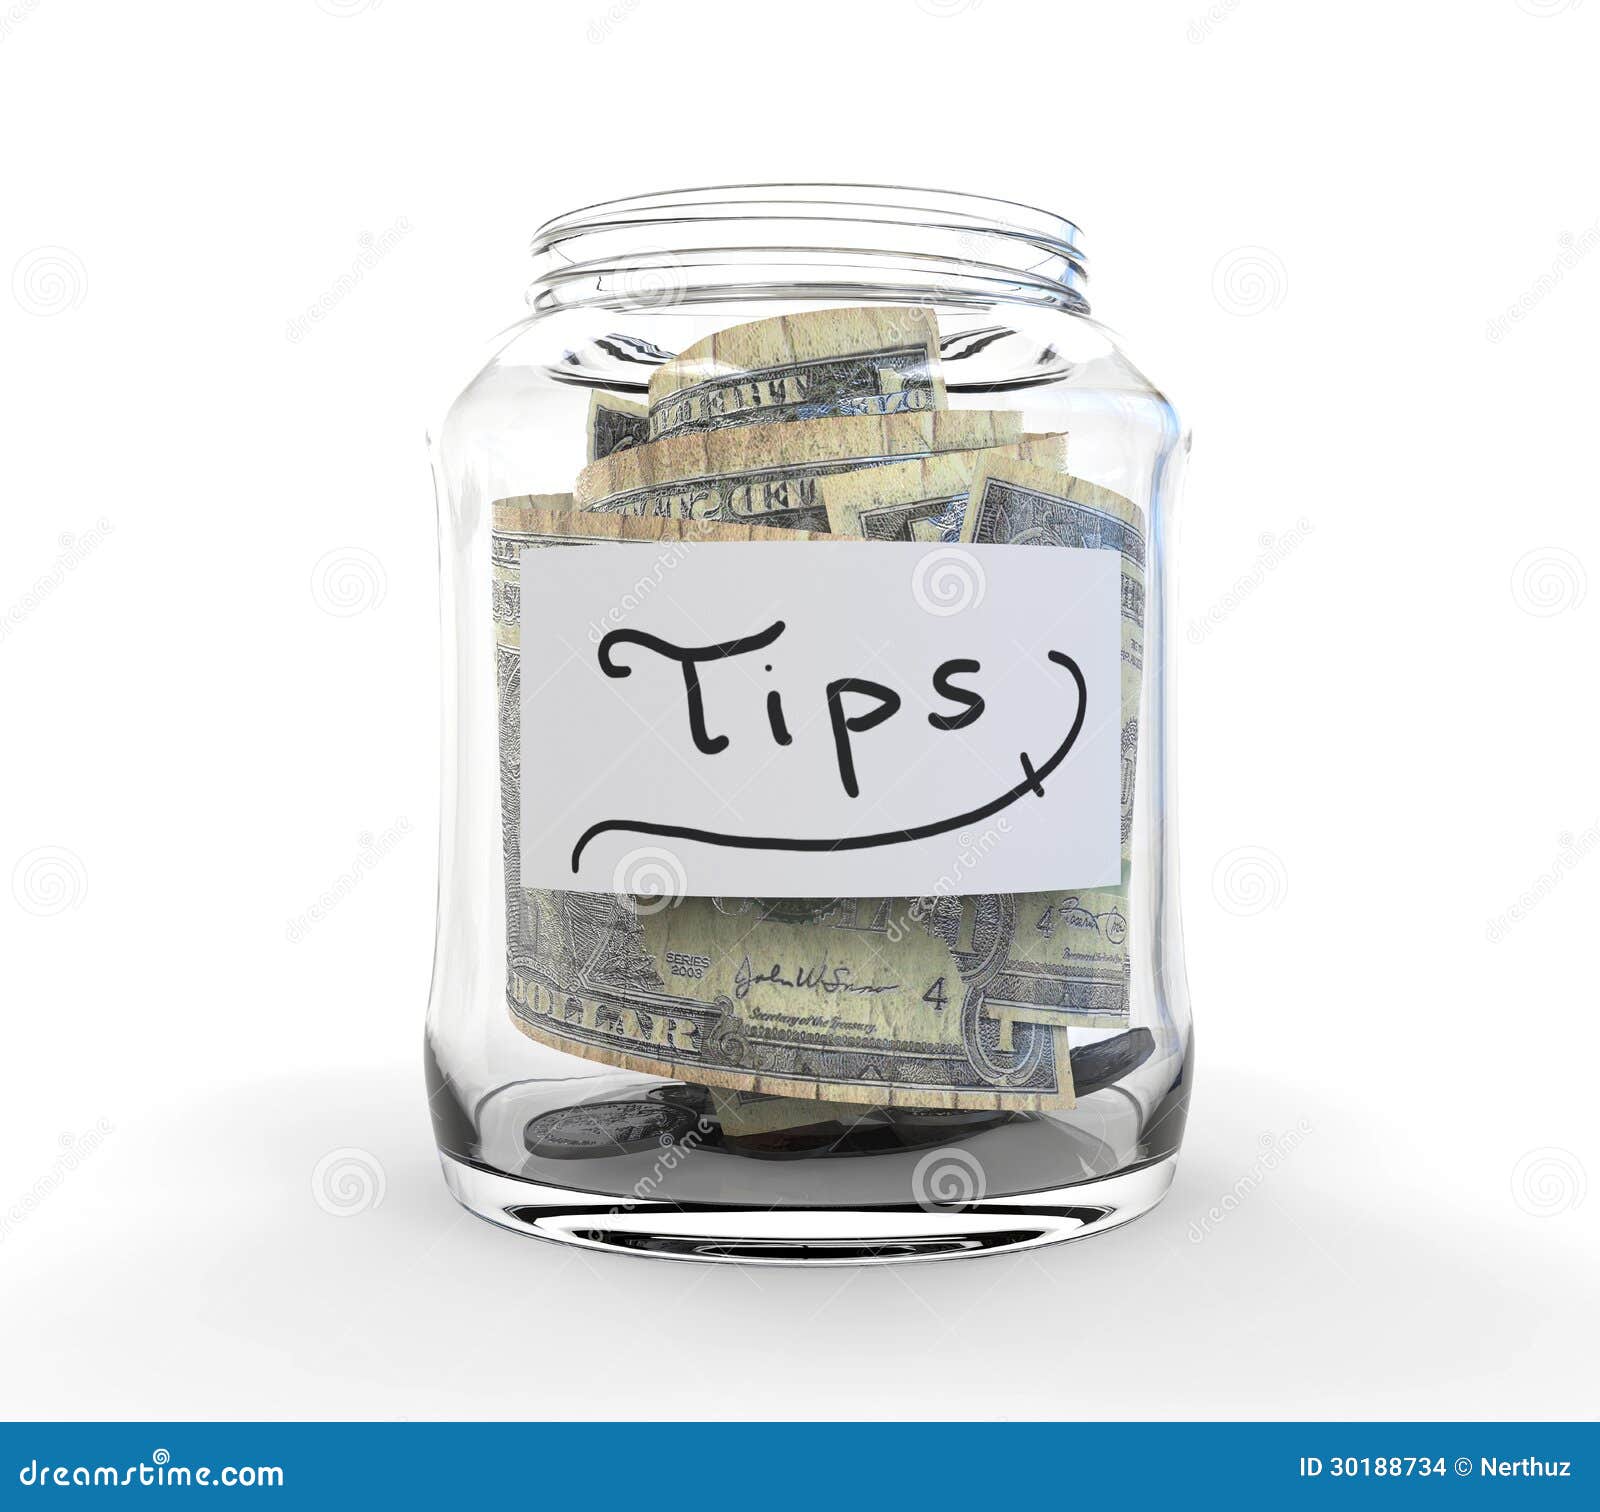 clear glass jar for tips with coins and bills